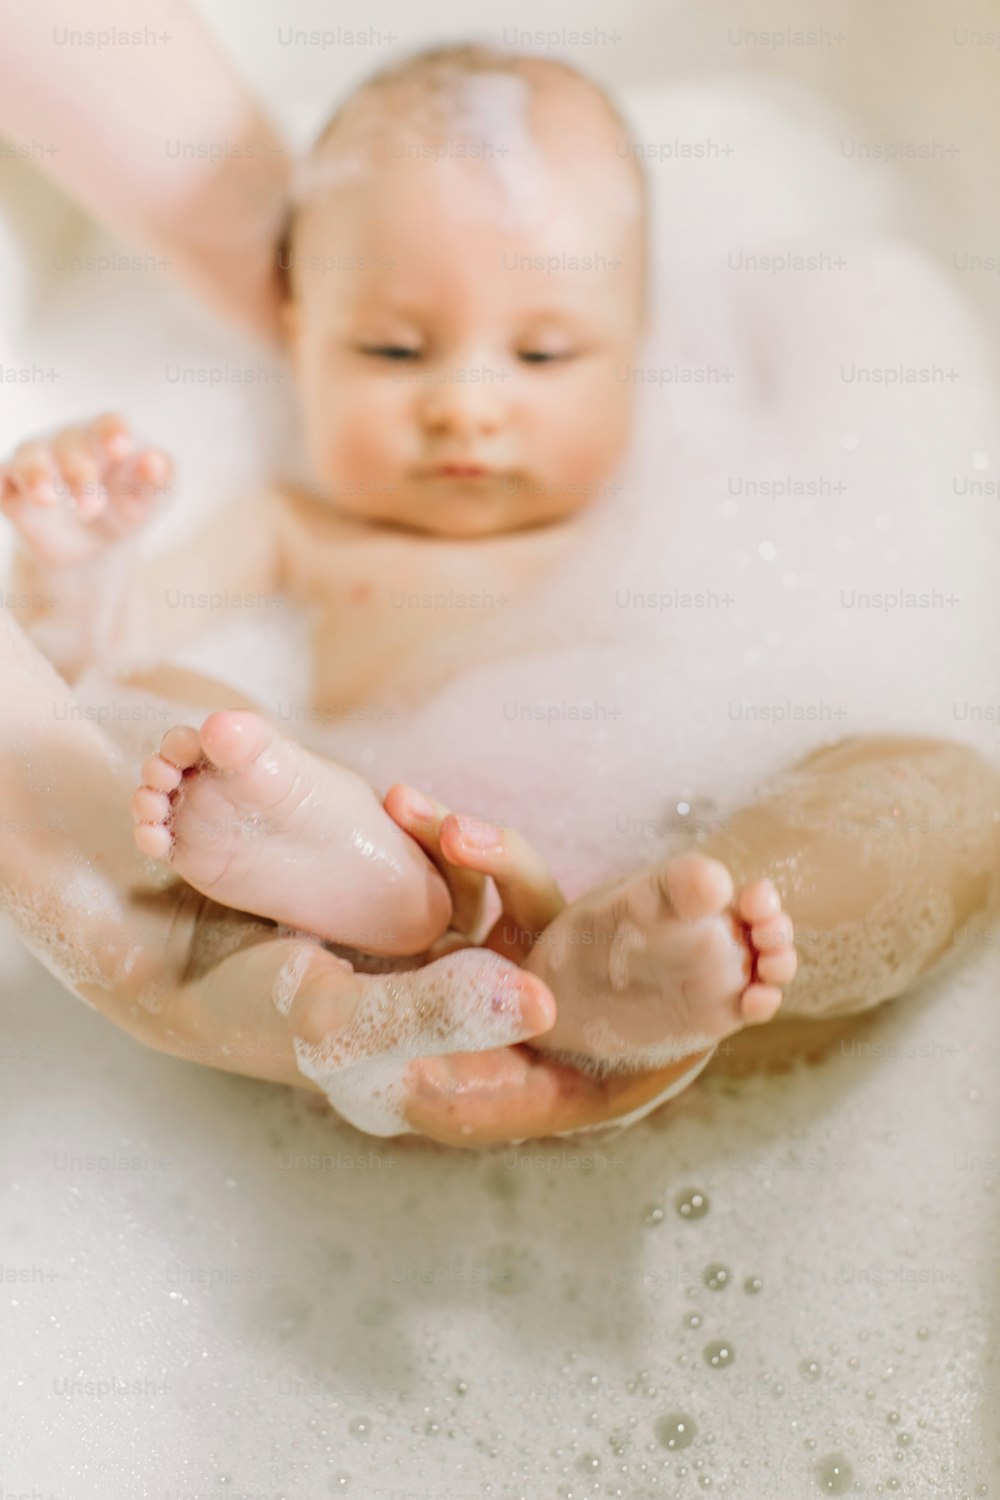 Happy laughing baby taking a bath playing with foam bubbles. Little child in a bathtub. Infant washing and bathing. Hygiene and care for young children. Newborn baby bathing